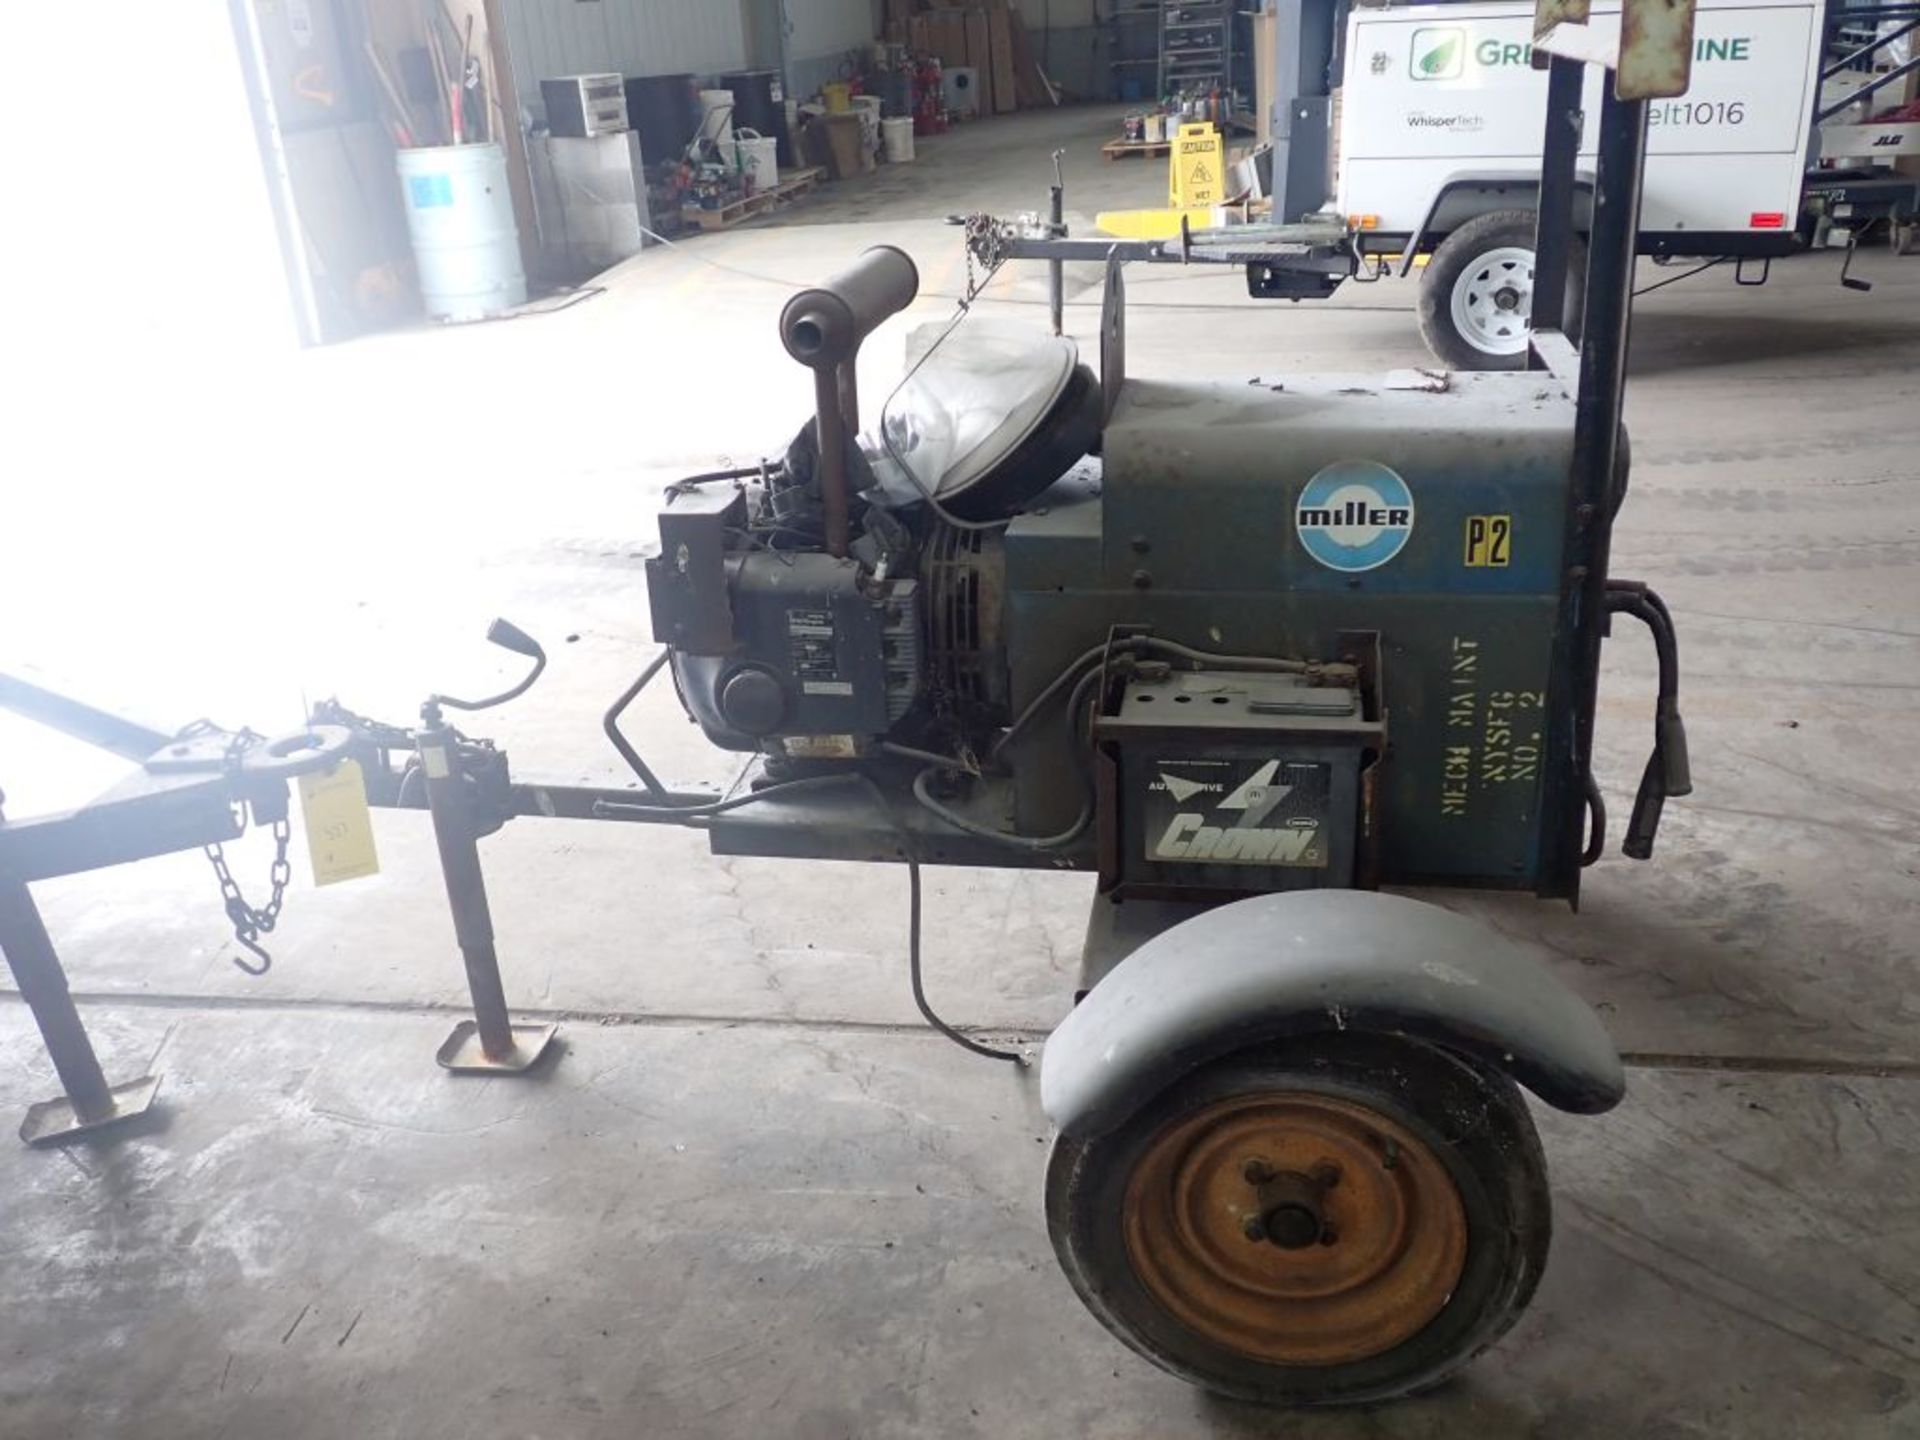 Miller Welding Generator AC/DC AEAD-200LE | Wield Output: 25V, 2000 RPM; Power Outage: 120/420V,